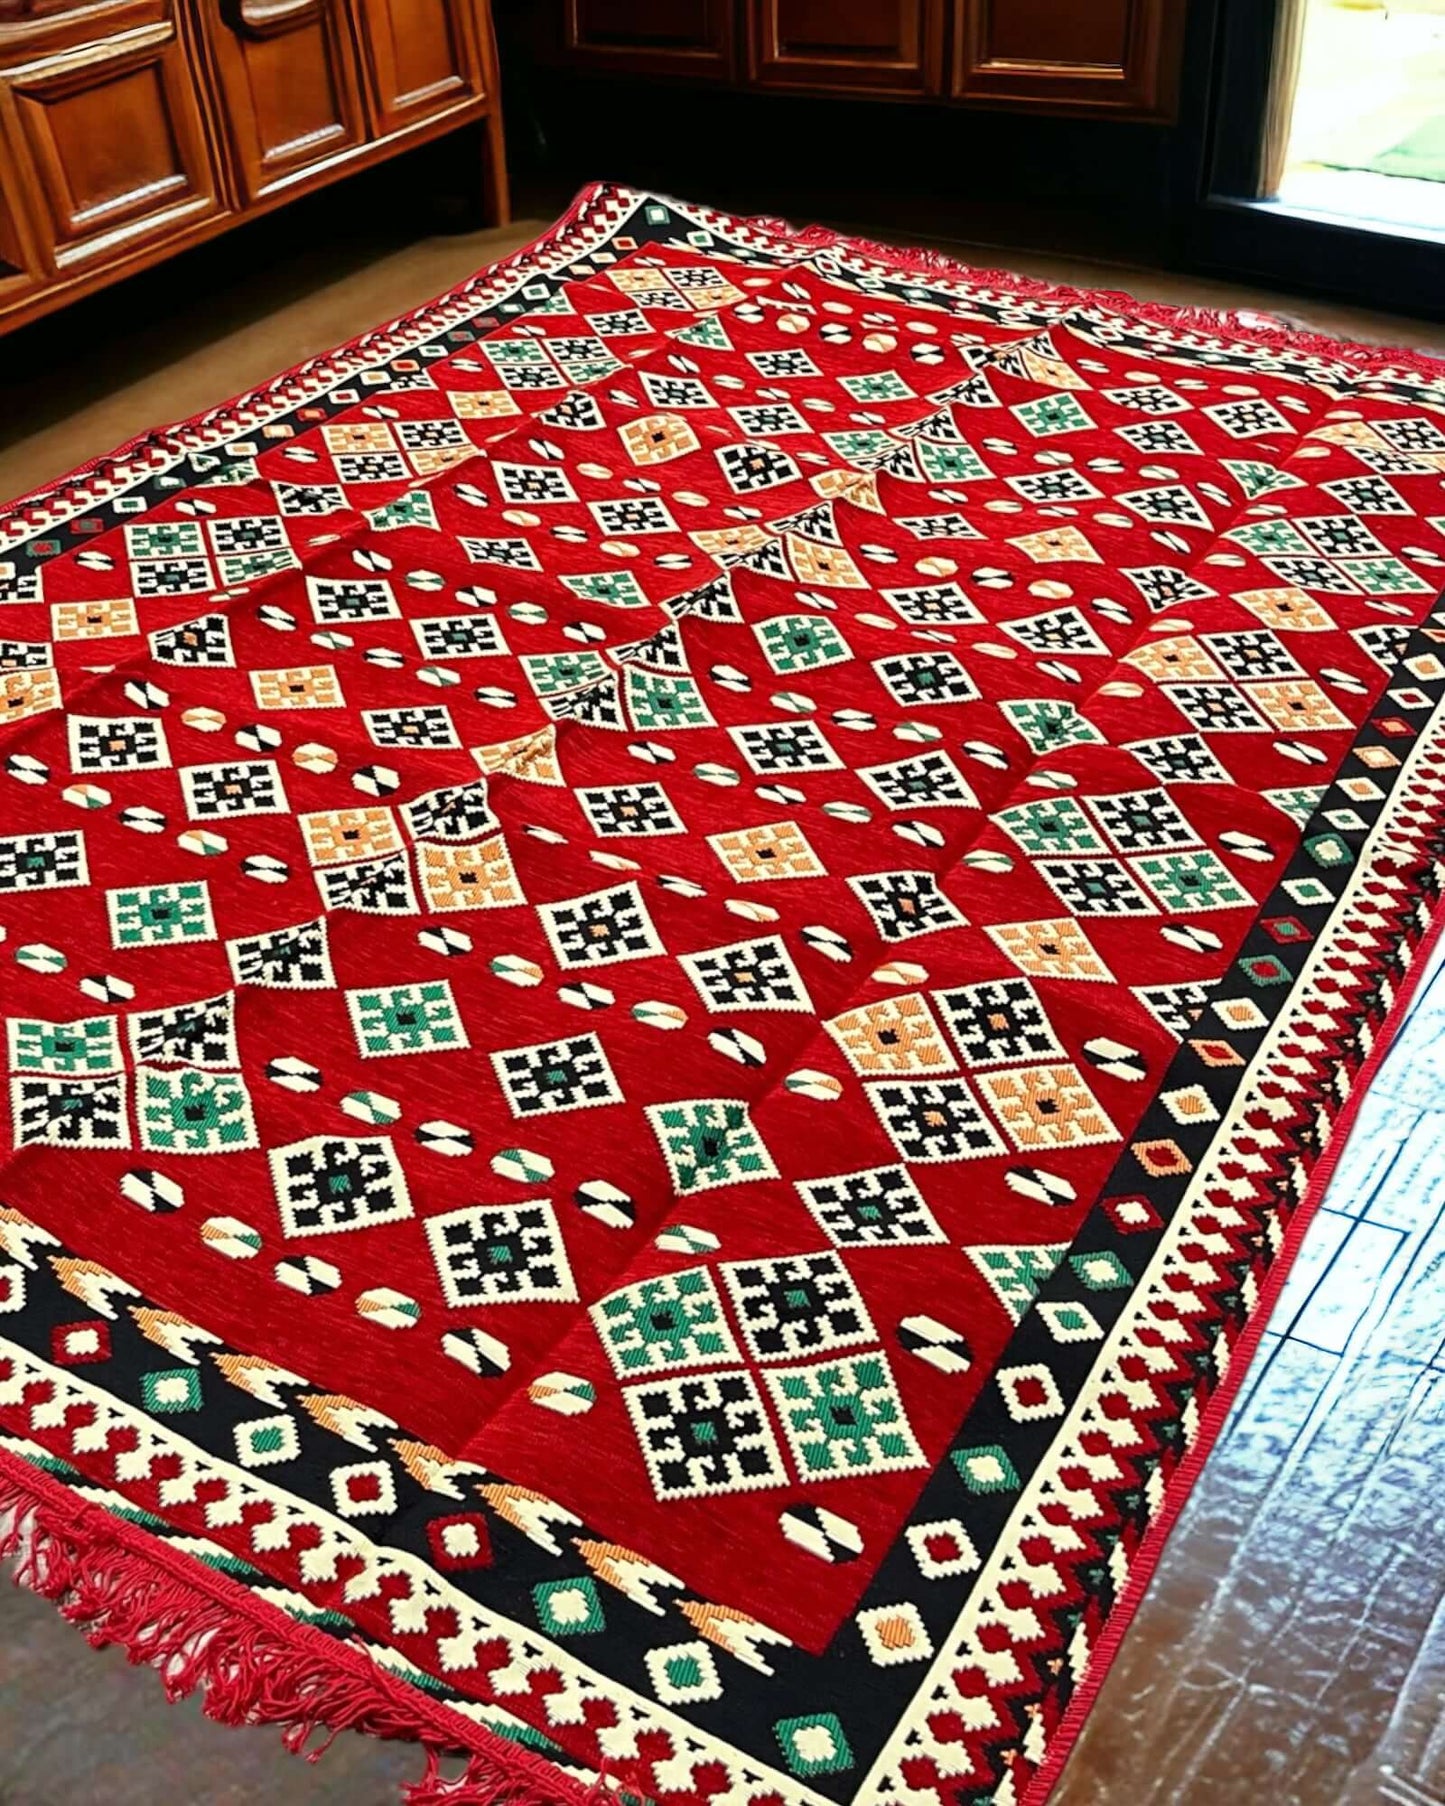 Turkish Kilim Rugs- Perfect match for your divan set and floor cushions. Crafted from 100% cotton in Turkey, this rug seamlessly complements your living space with its captivating geometric pattern and practical design. Matching rugs for Arabian Majlis